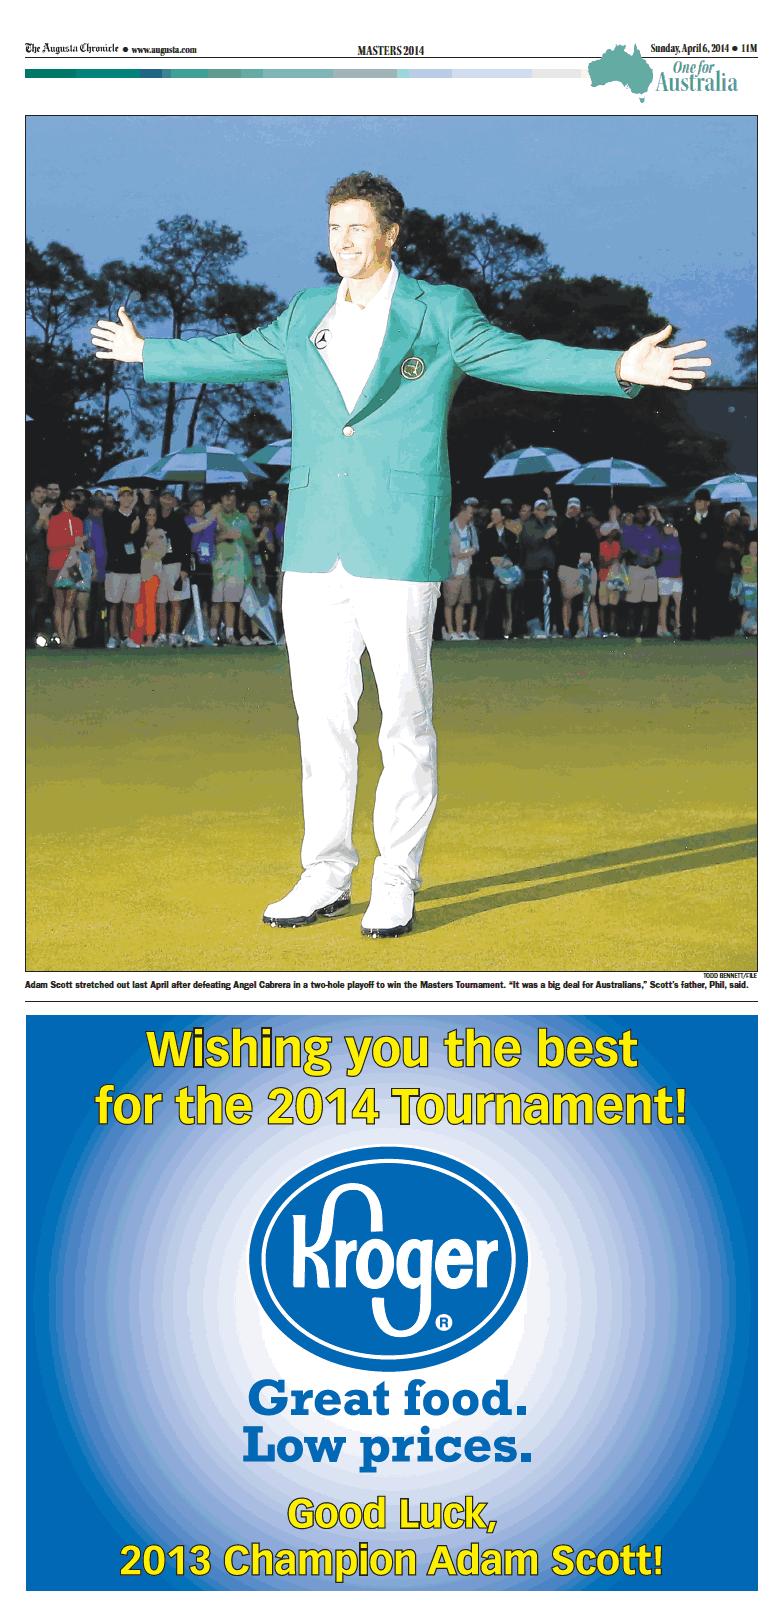 GOOD LUCK AD SPONSOR Be the advertiser to wish the 2015 Masters Champion Good Luck in the 2016 Preview Section.